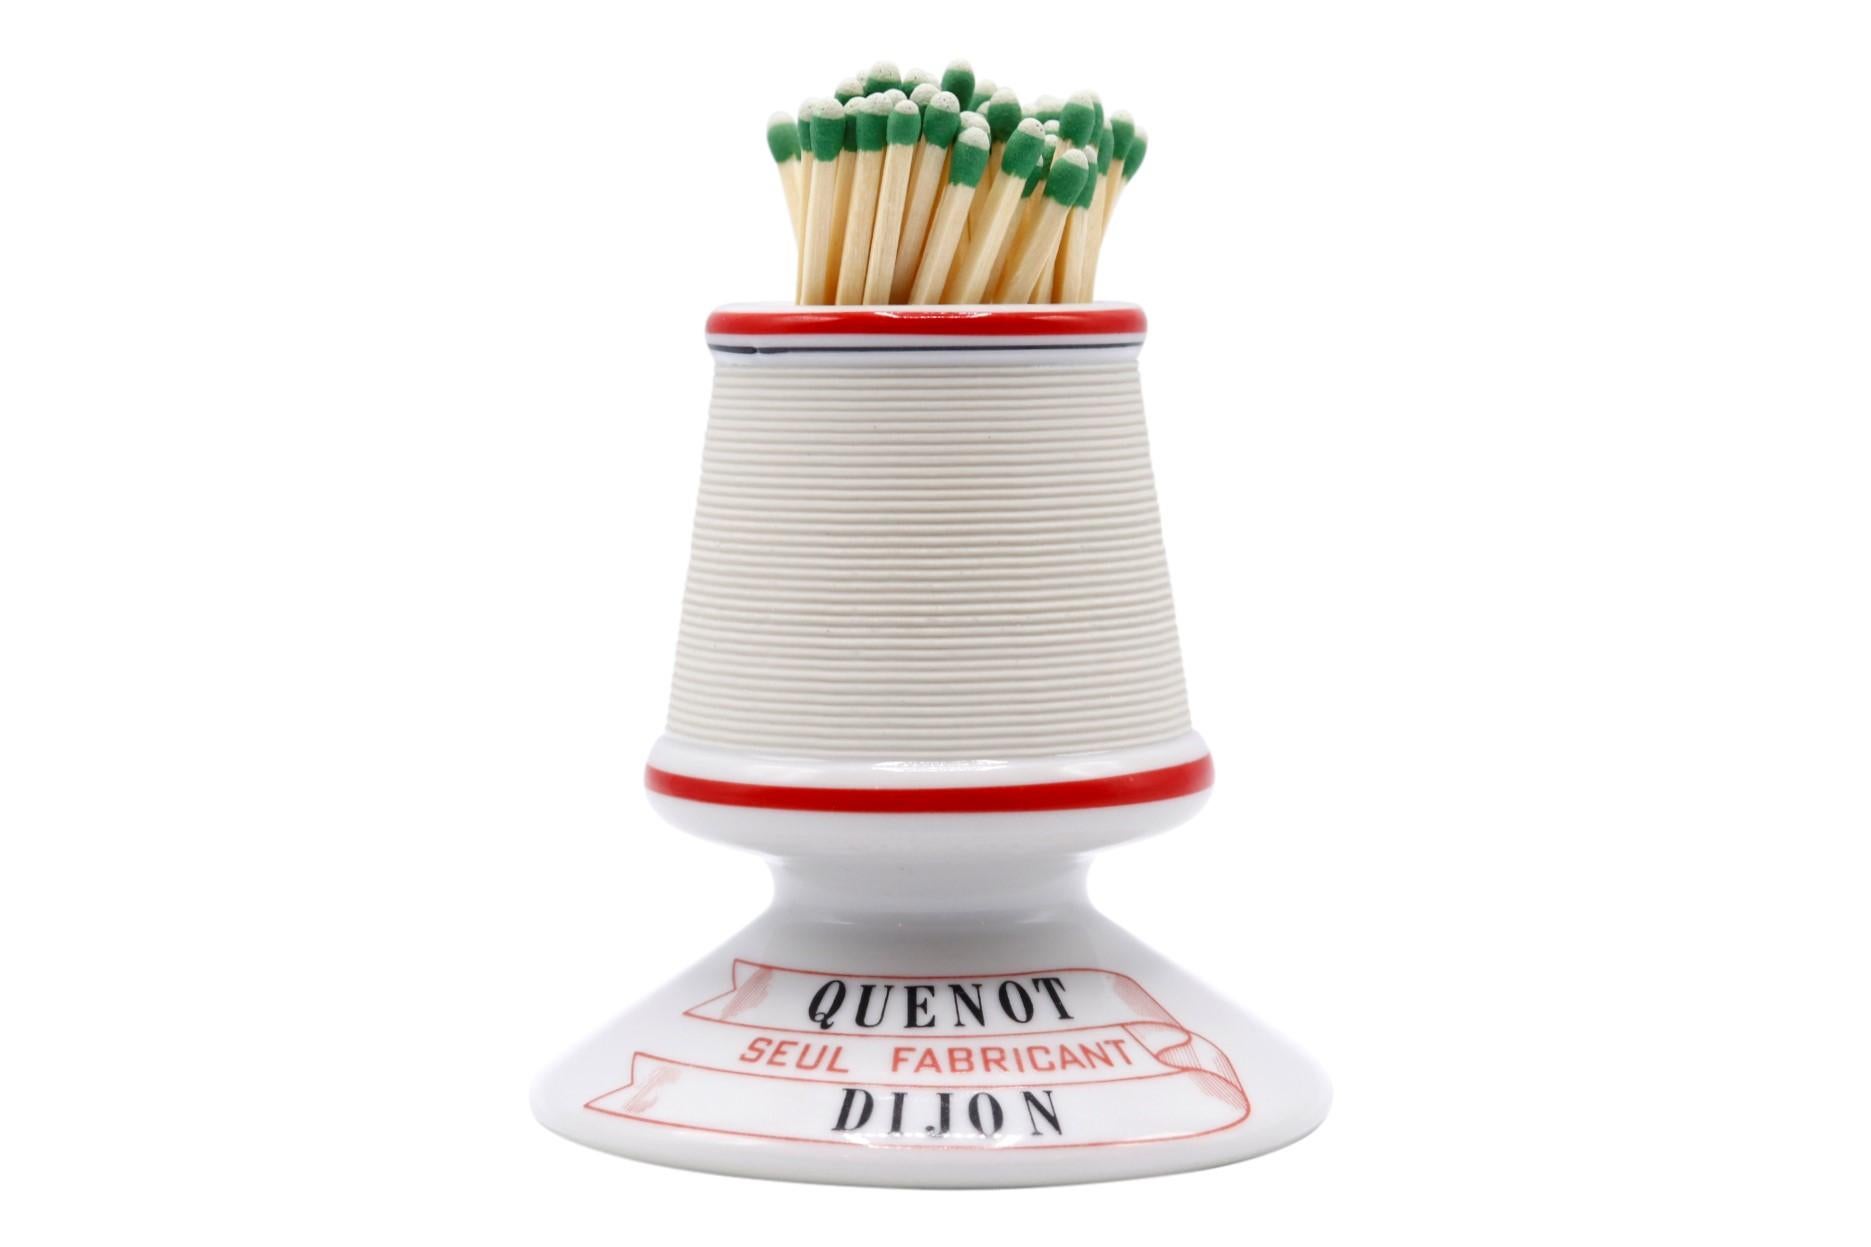 A Parisian café ceramic match striker and holder. Decorated with a red line around the top and middle, with red and black writing on the base.